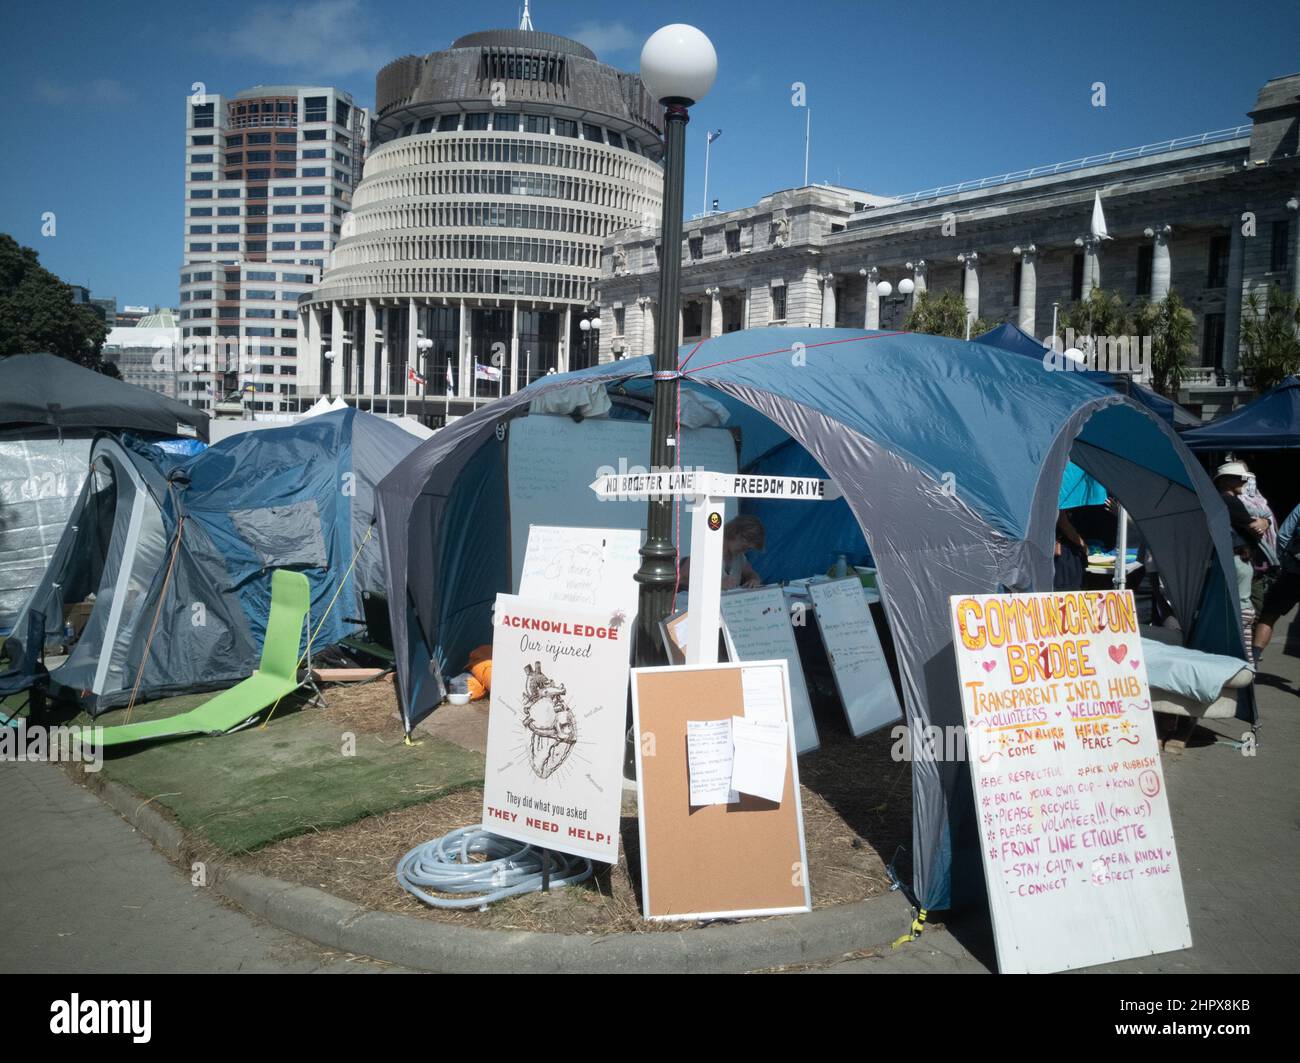 February 24, 2022 - Tent village occupying parliament grounds on Day 17 of the protest against covid vaccine mandates in Wellington, New Zealand Stock Photo